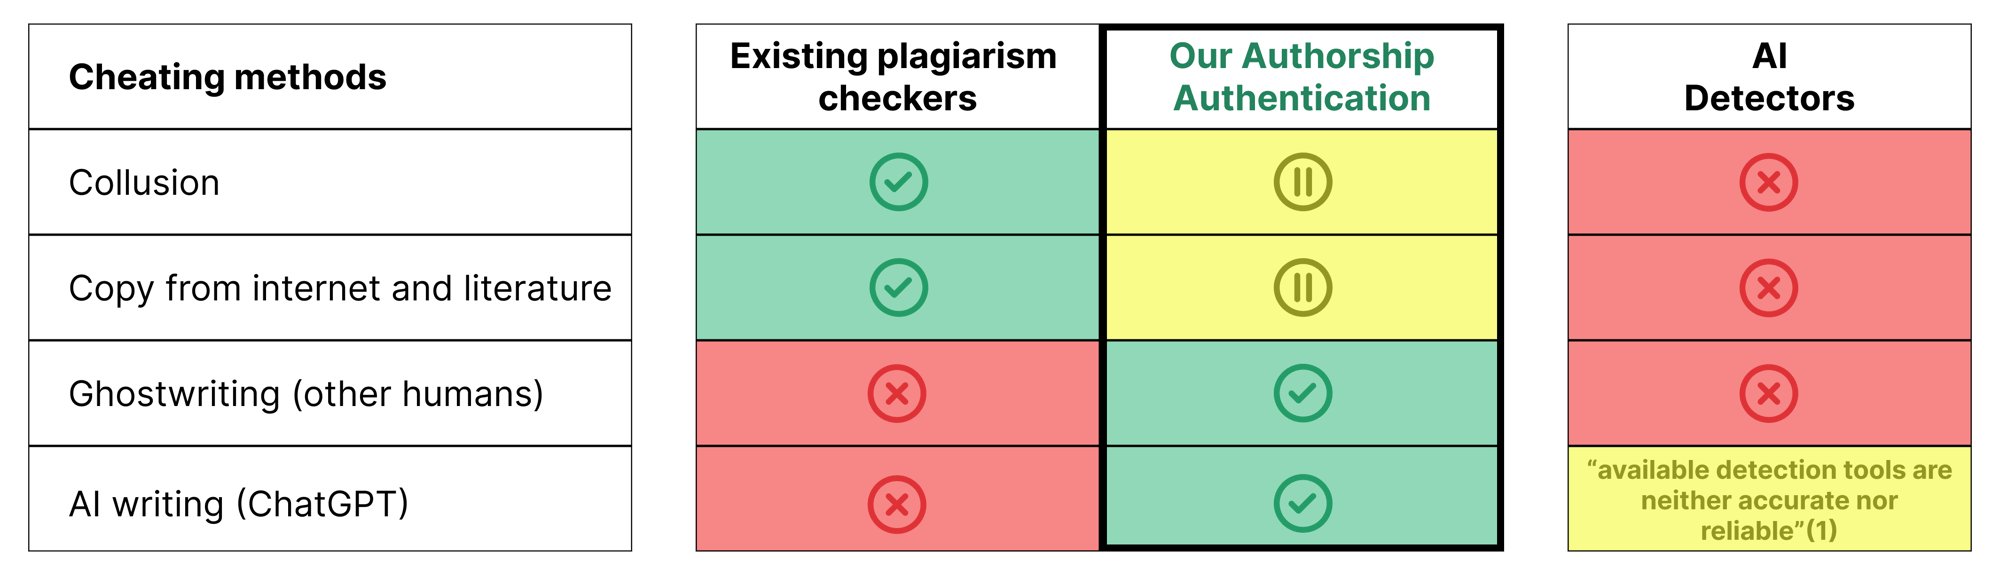 Table showing existing cheating methods and how to discover them, including plagiarism checkers and authorship authentication